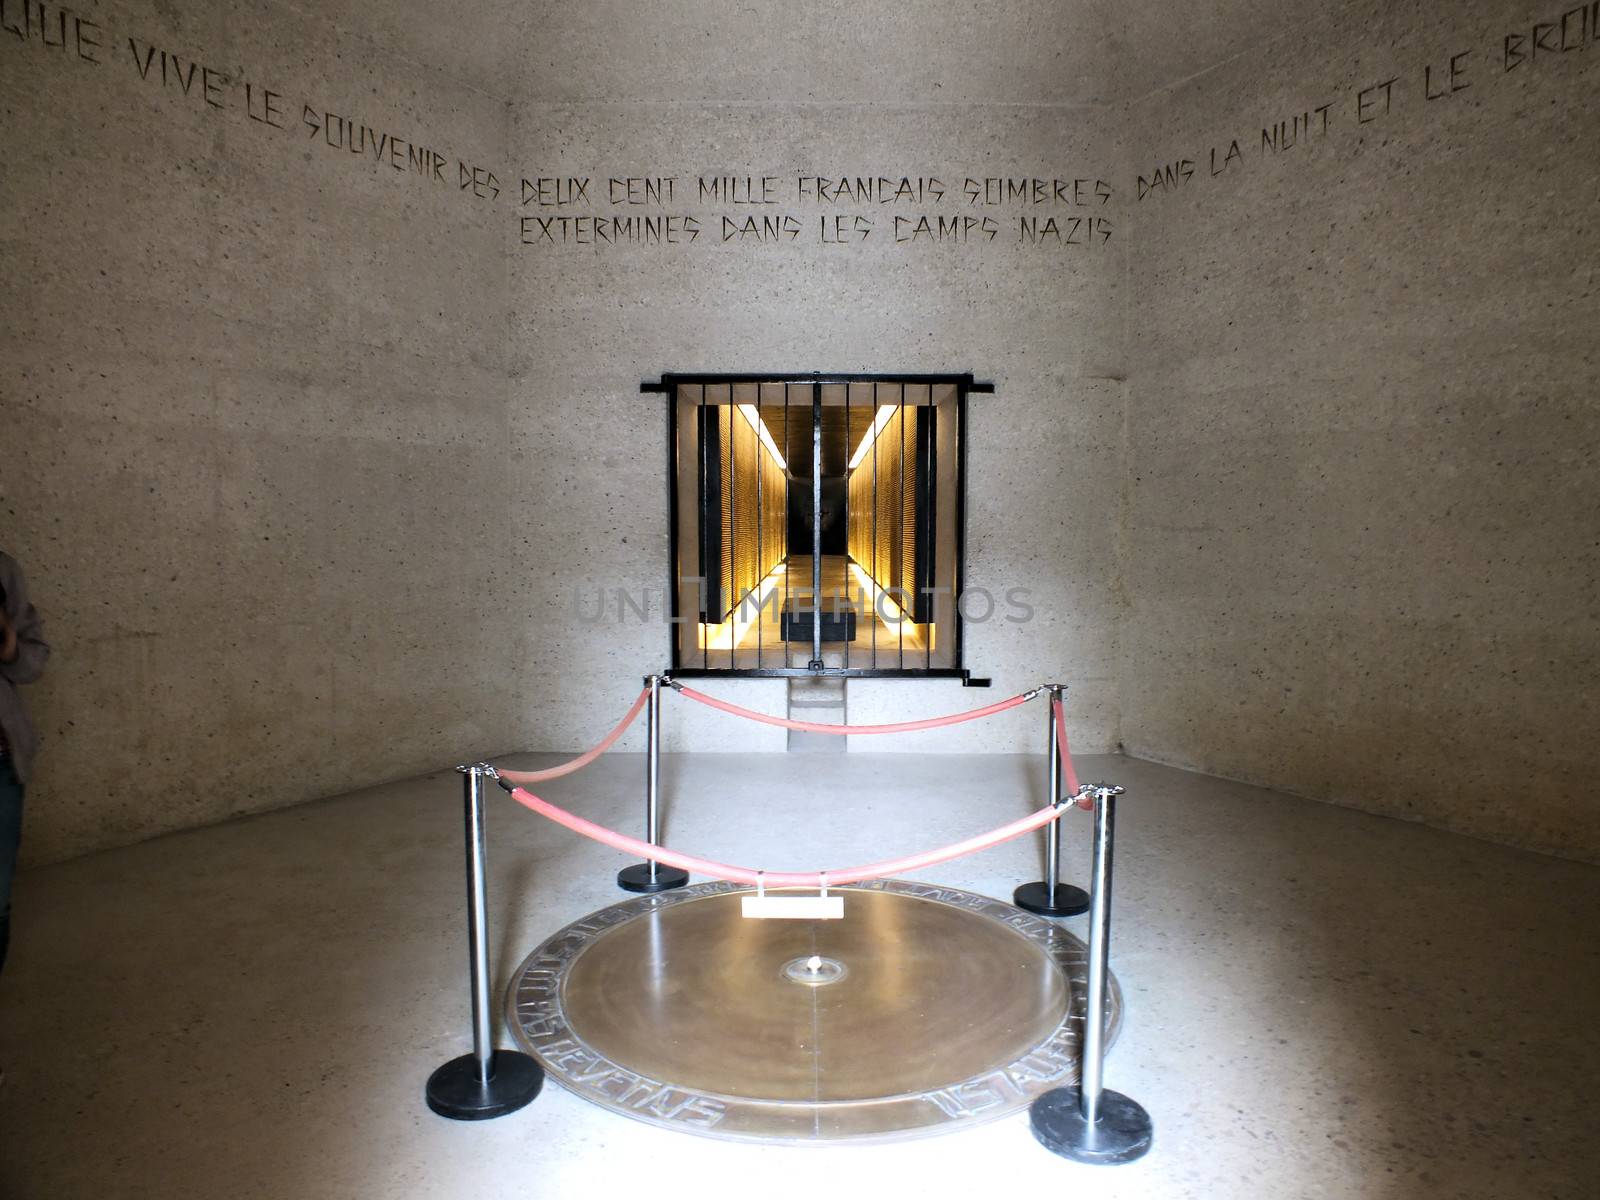 The Memorial des Martyrs de la Deportation was opened in 1962 as a memorial to the 200,000 people deported from Vichy France to the Nazi concentration camps during World War II. 
The circular plaque on the floor is inscribed "They descended into the mouth of the earth and they did not return".